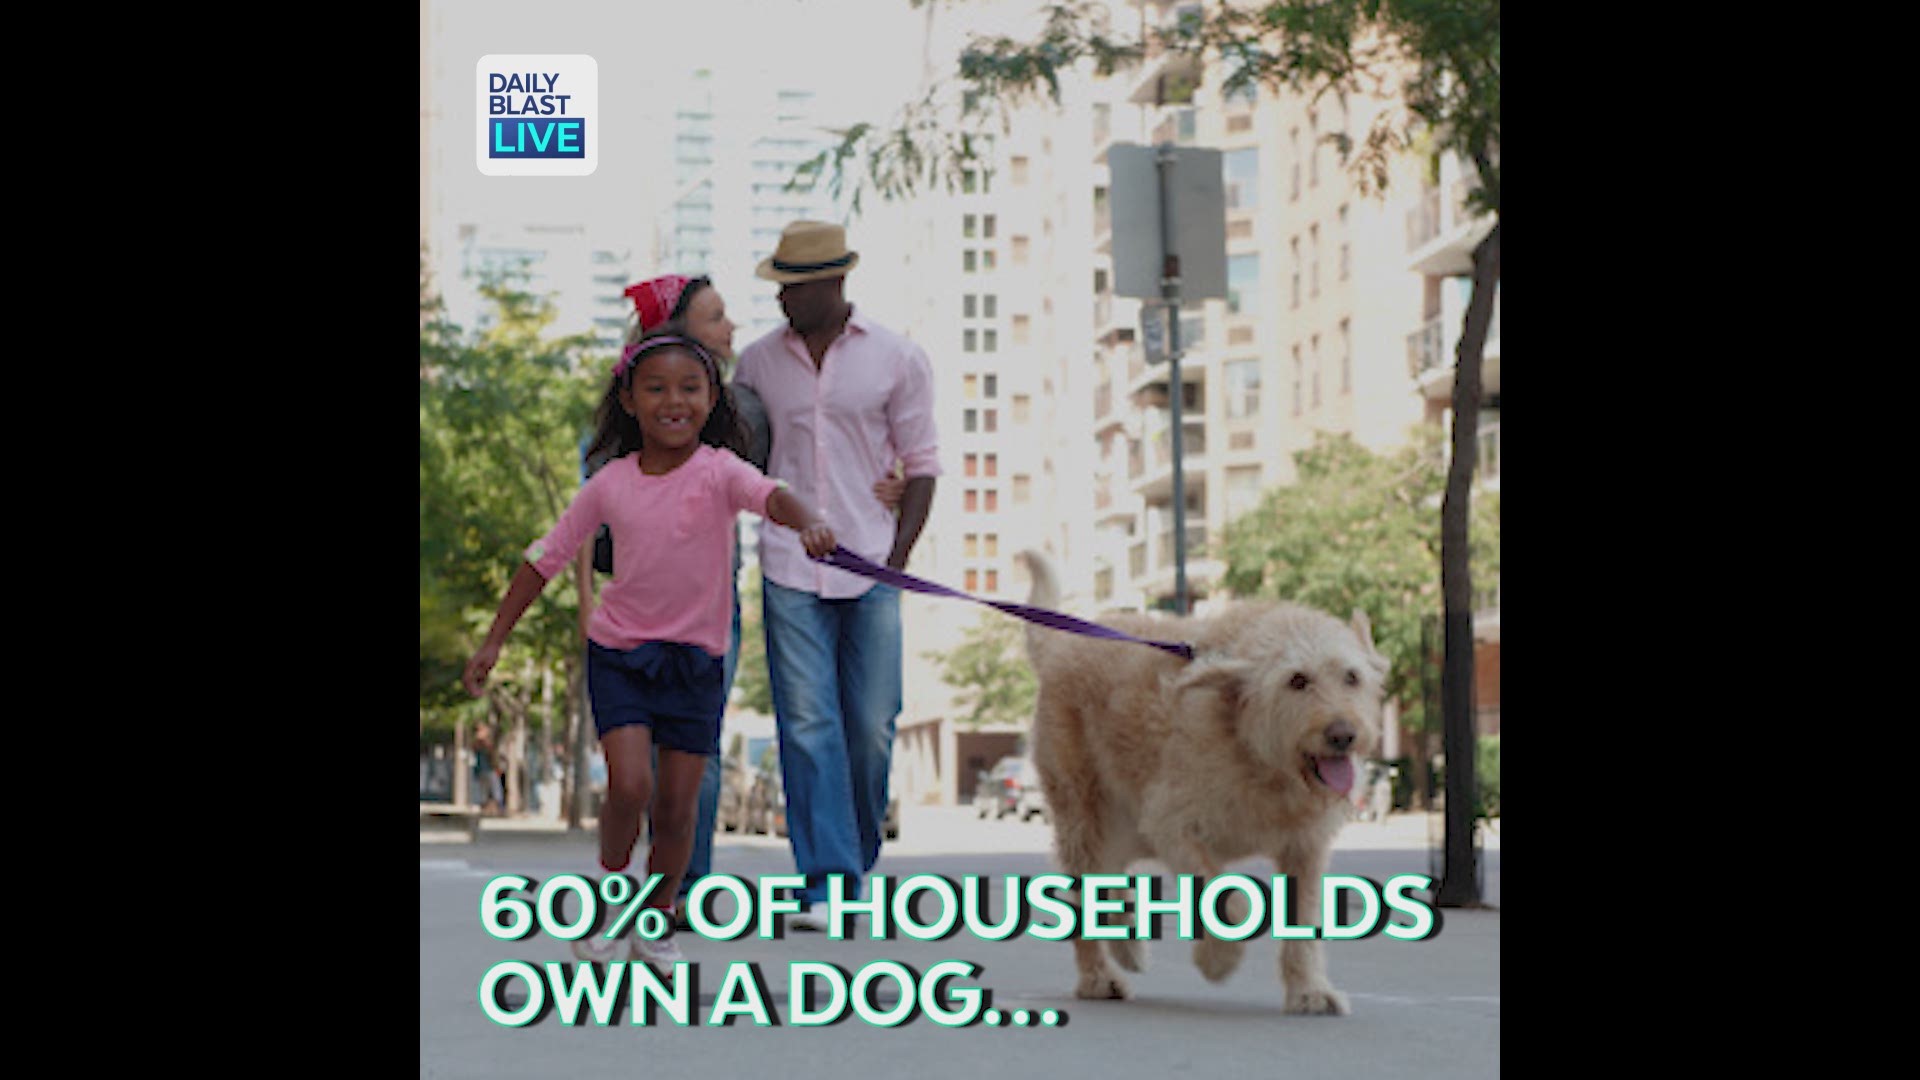 American households spend TONS of their pets!